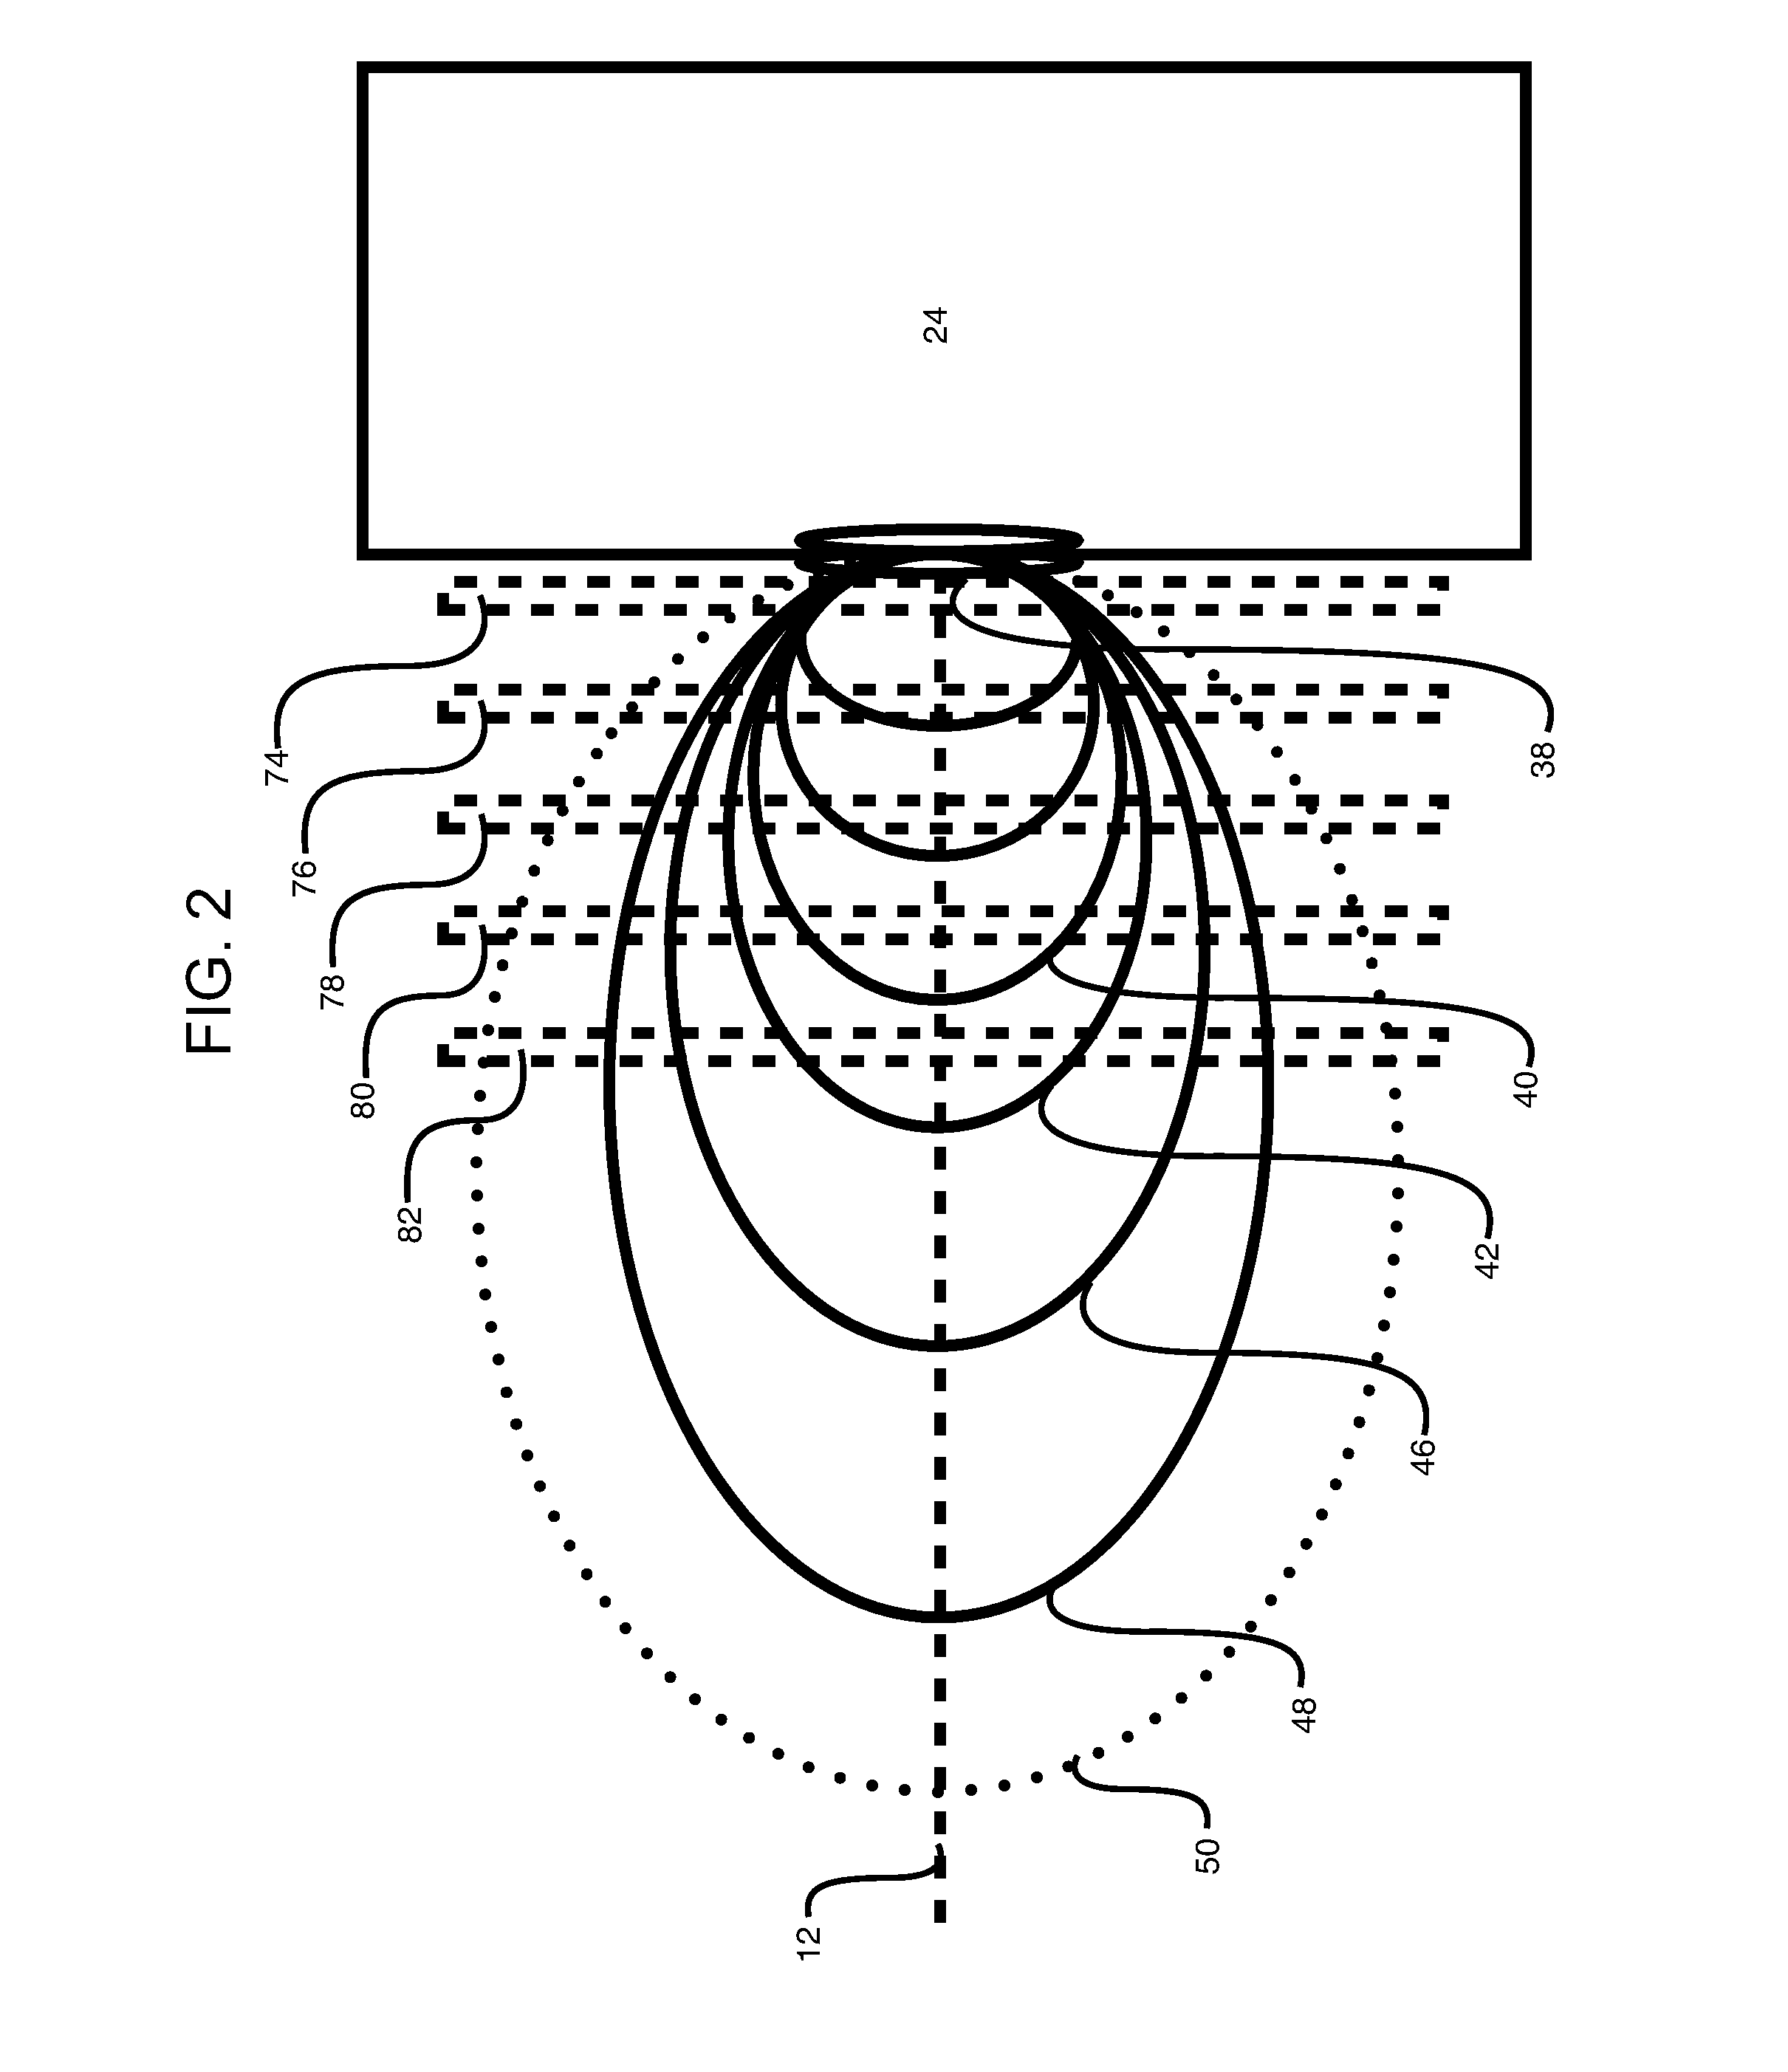 Method and apparatus for production of uniformly sized nanoparticles